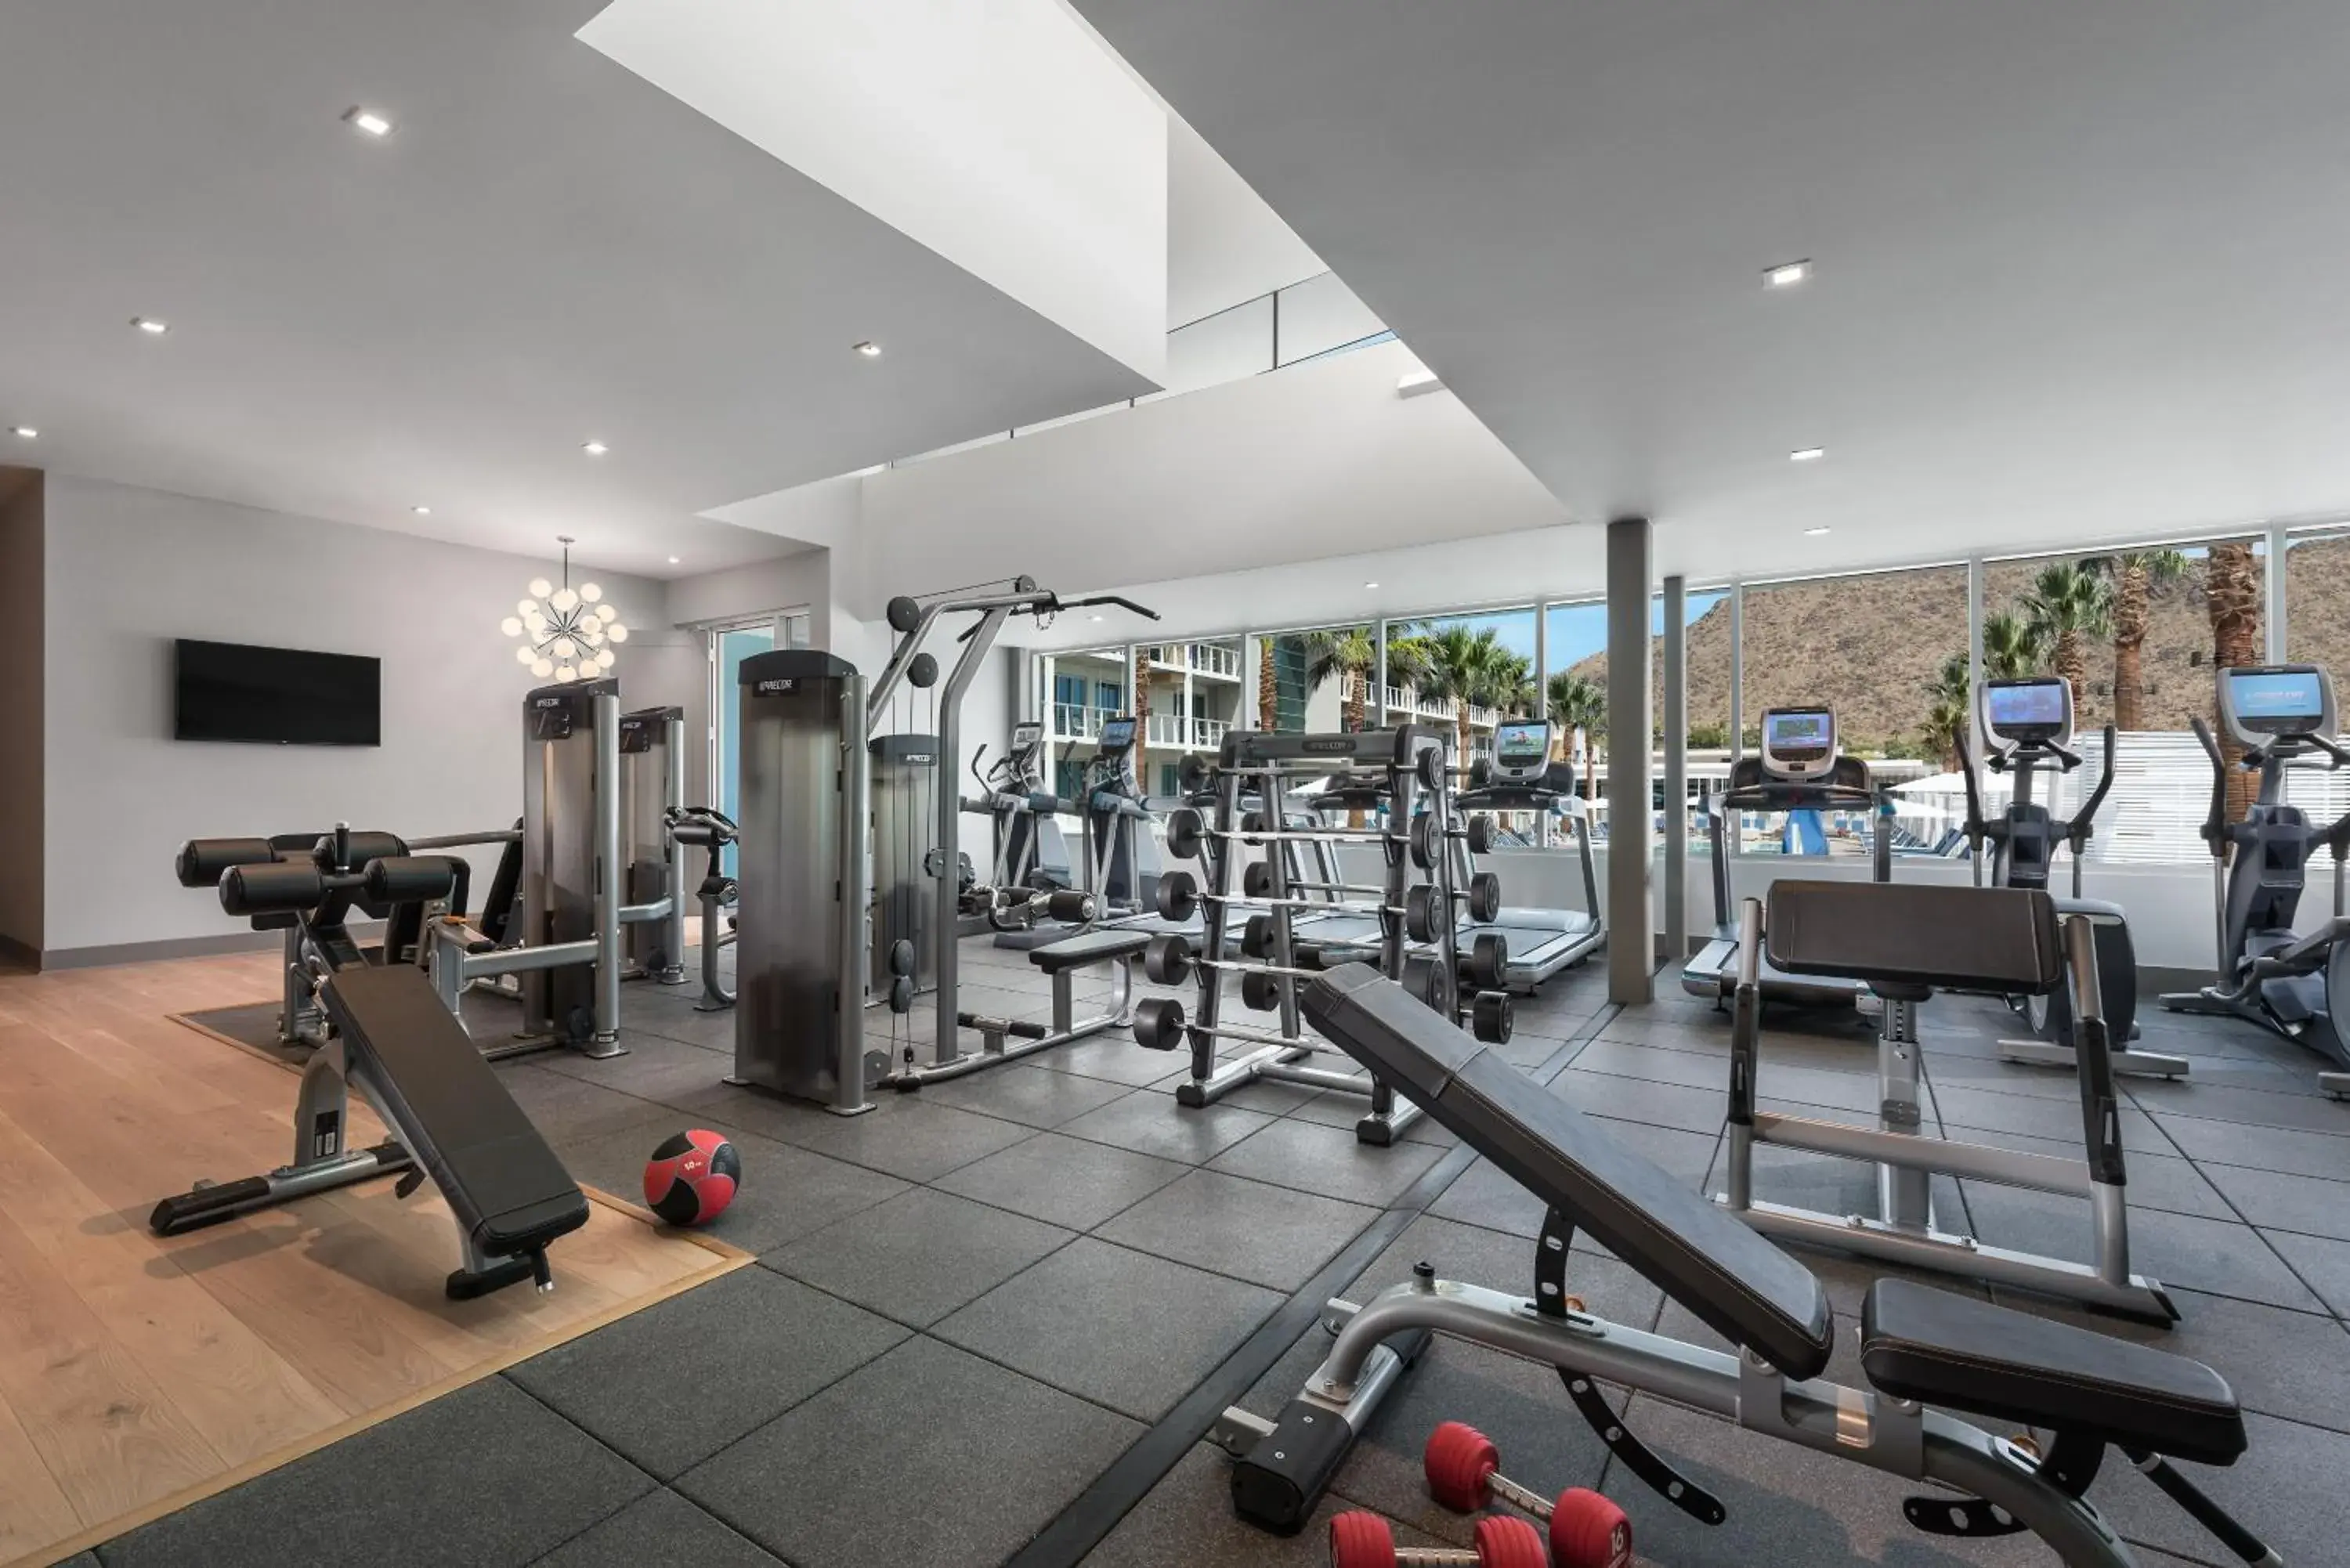 Fitness centre/facilities, Fitness Center/Facilities in Mountain Shadows Resort Scottsdale